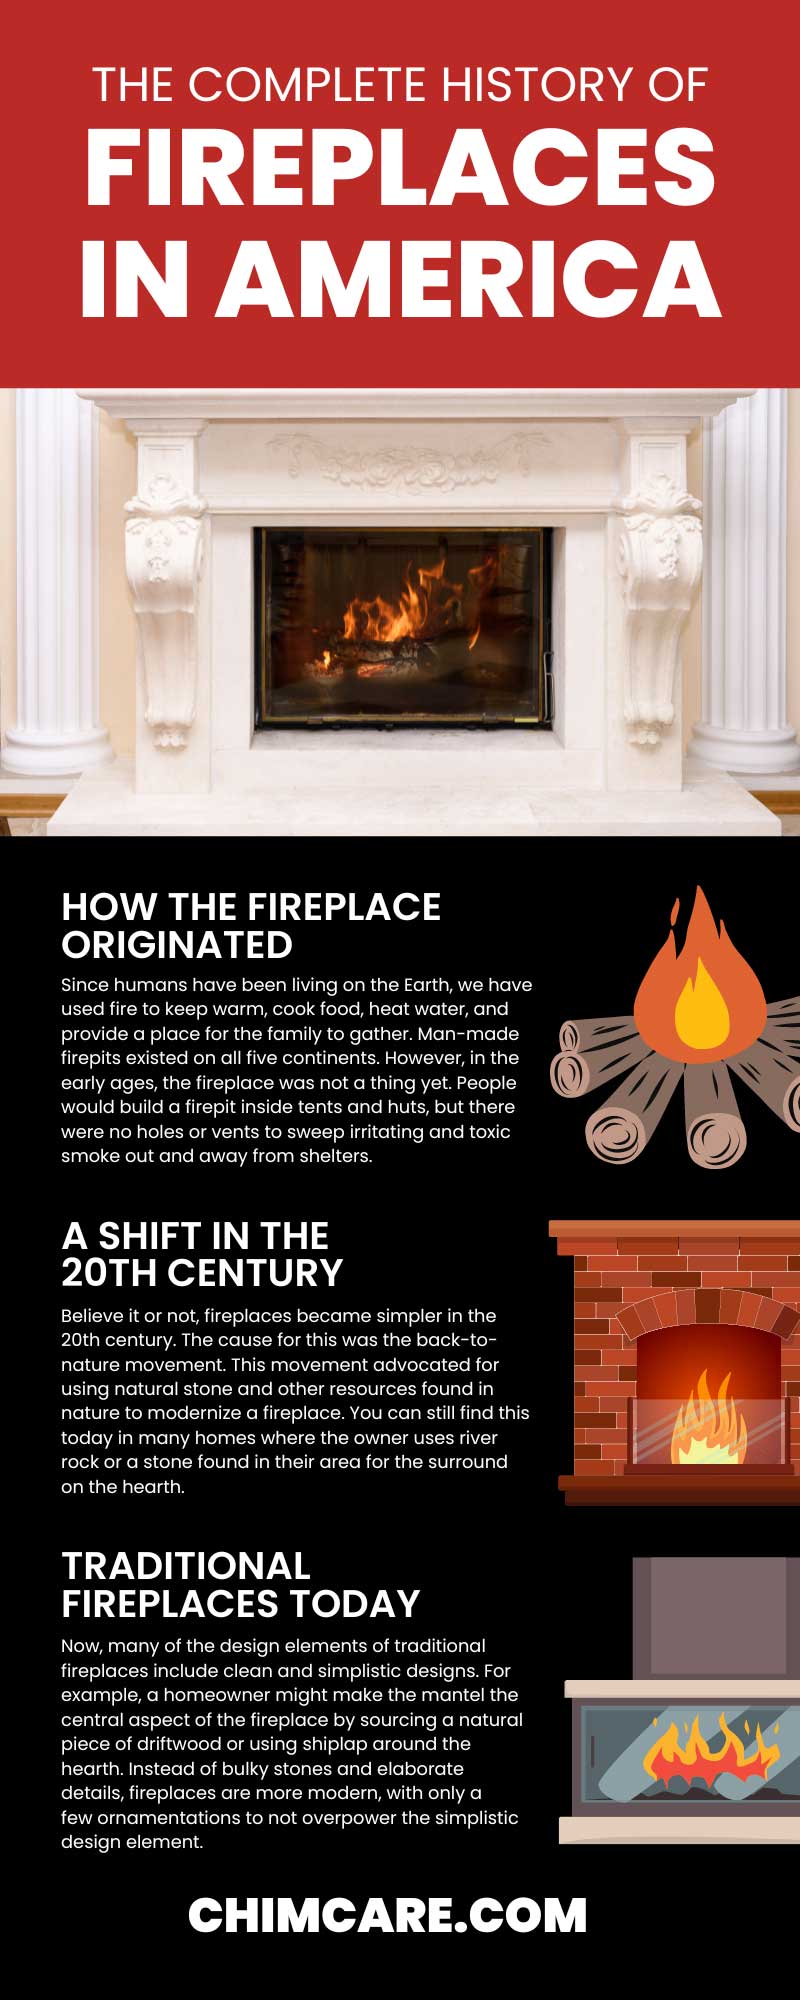 The Complete History of Fireplaces in America